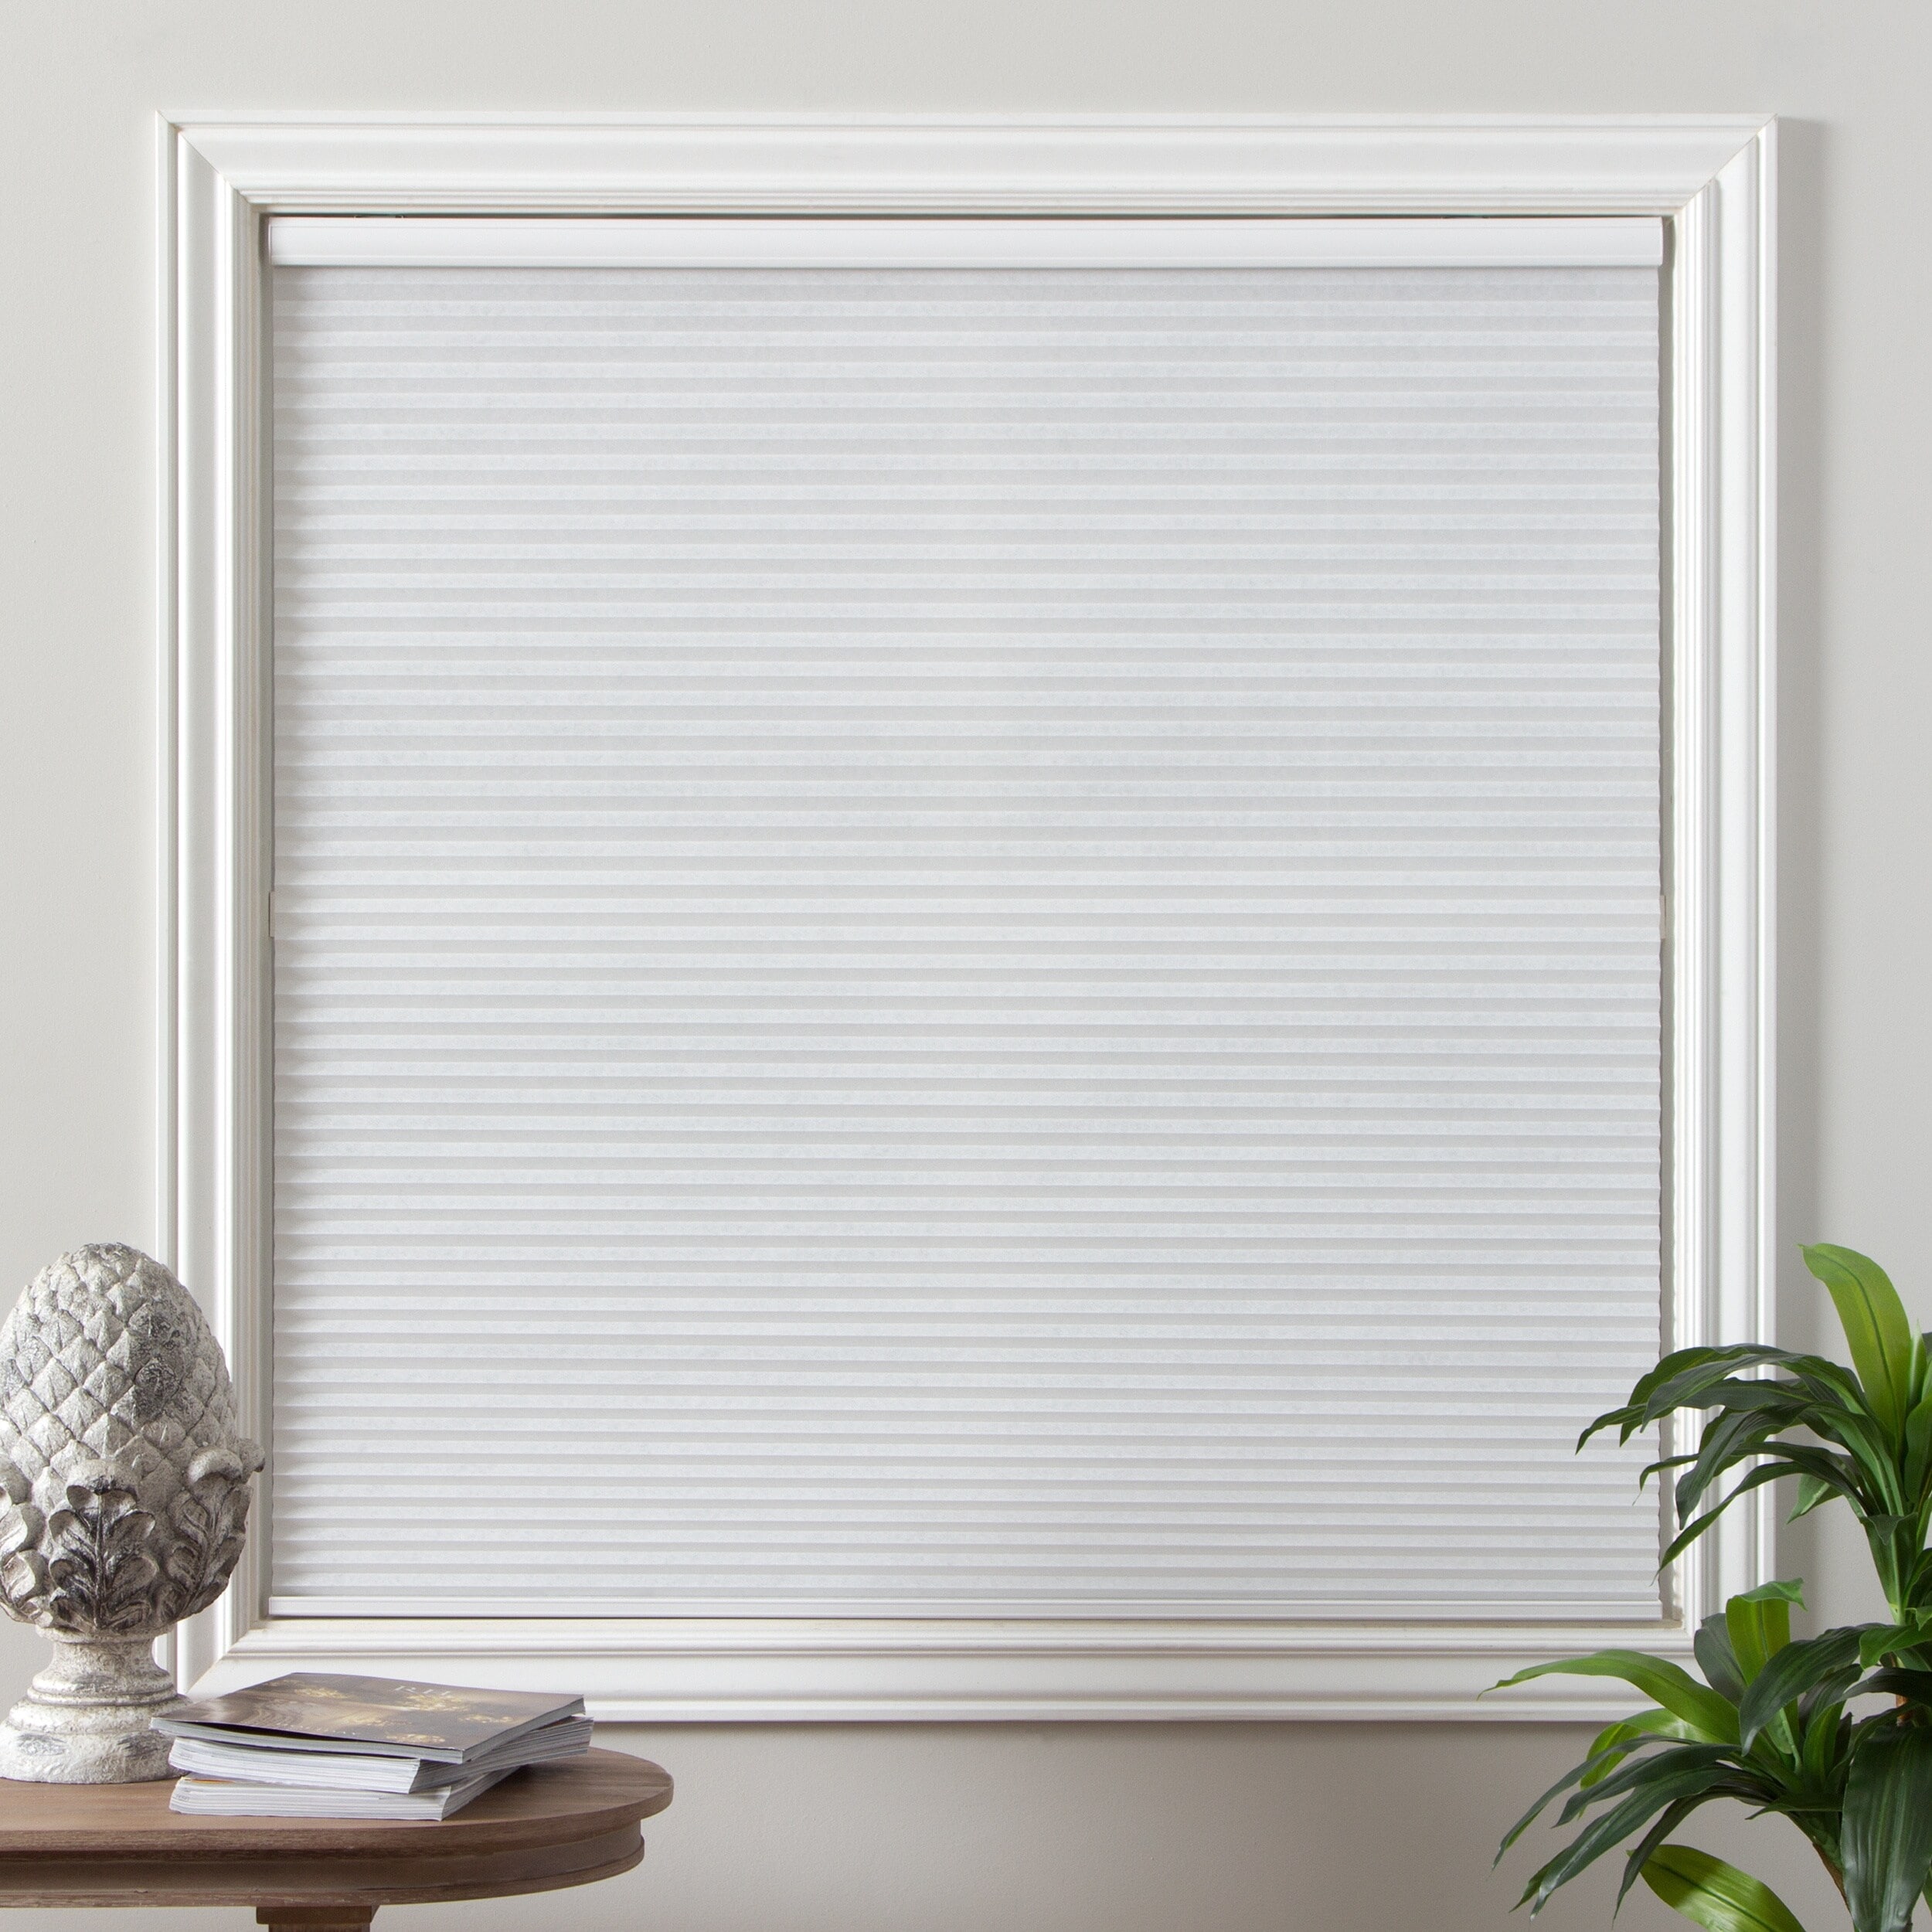 Color 36 W x 60 H Size Arlo Blinds Single Cell Light Filtering Cordless Cellular Shades Pure White